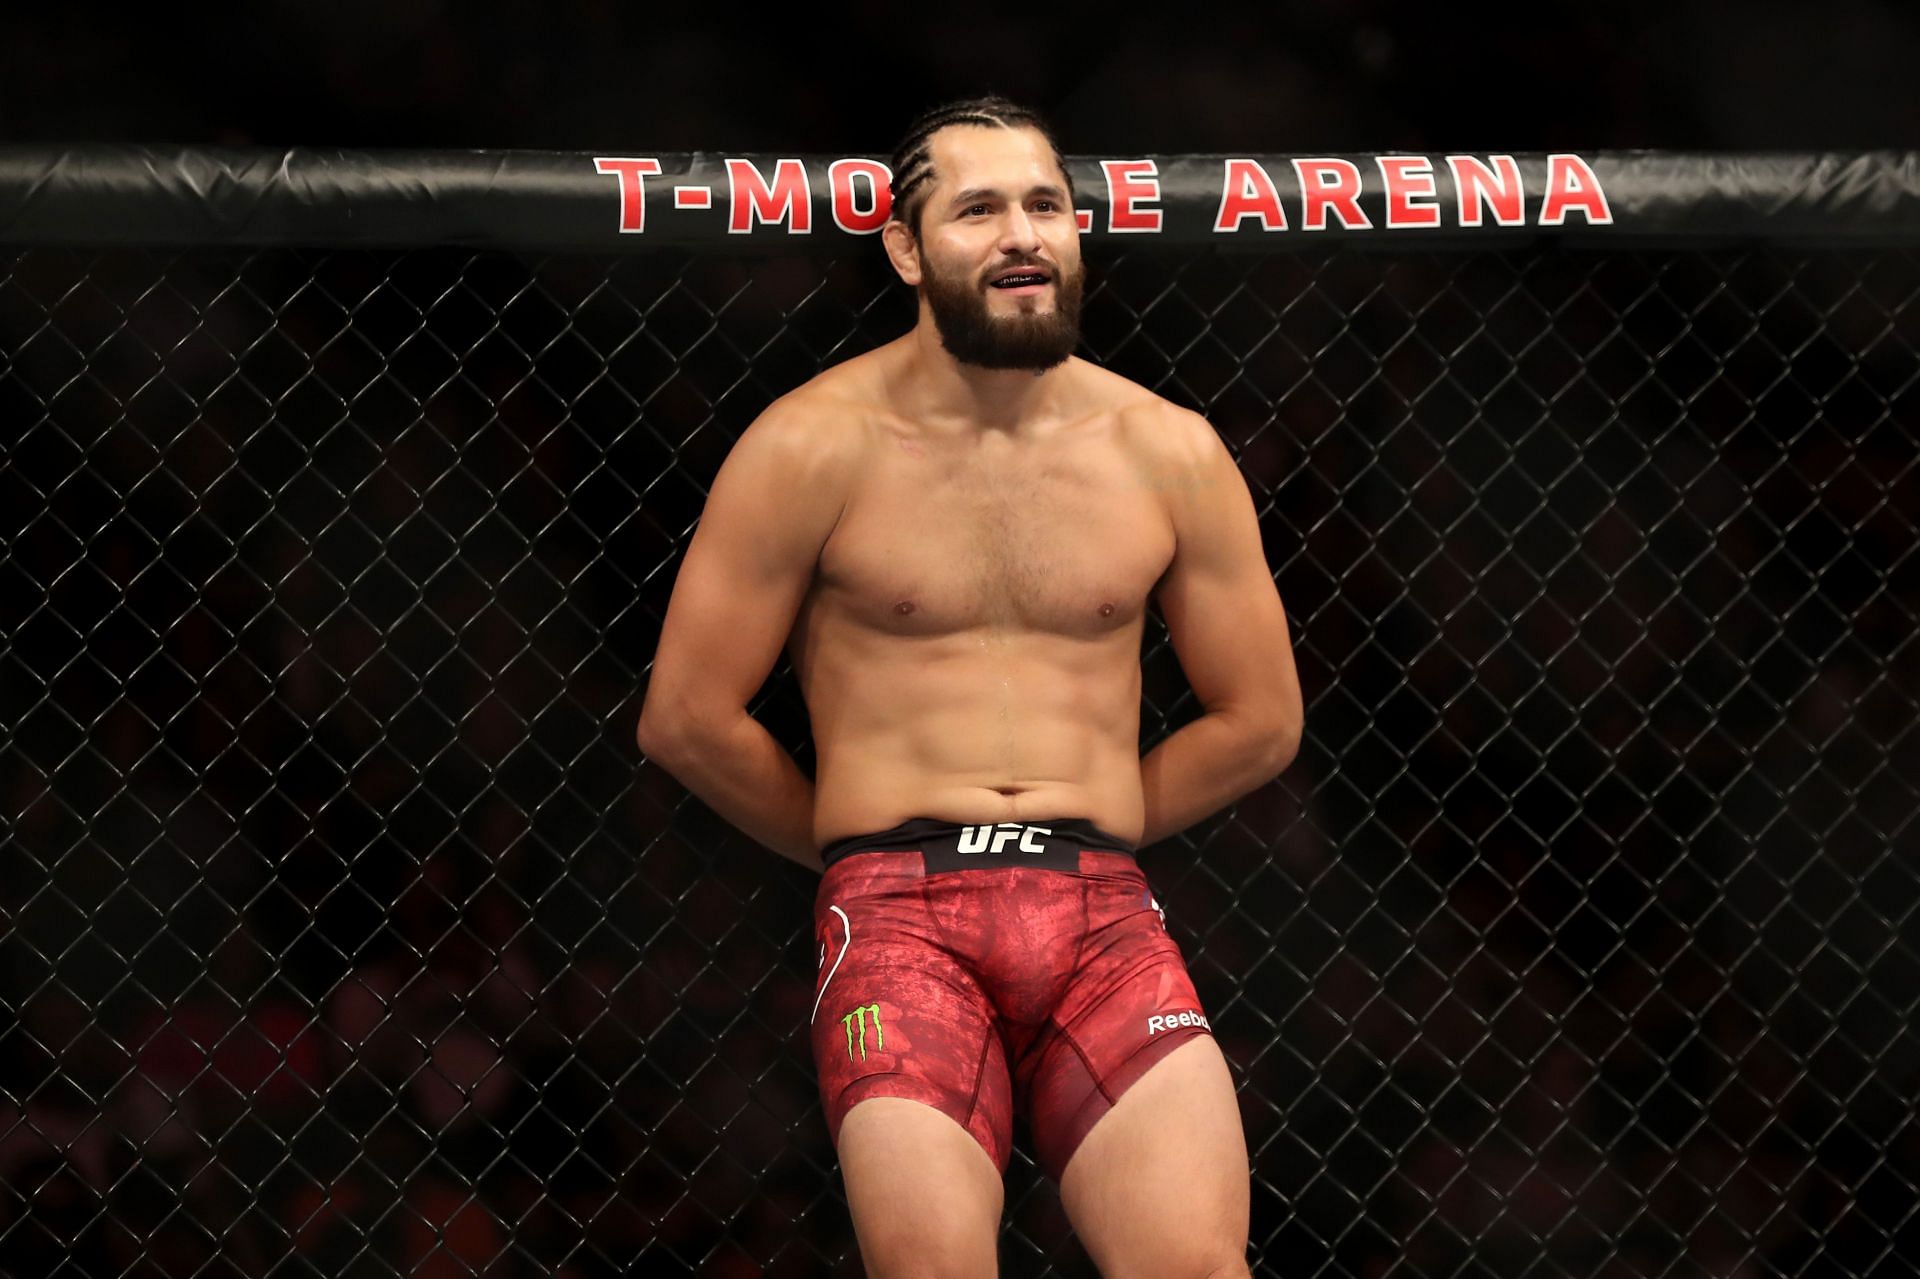 Jorge Masvidal could headline a major UFC pay-per-view against bitter rival Colby Covington